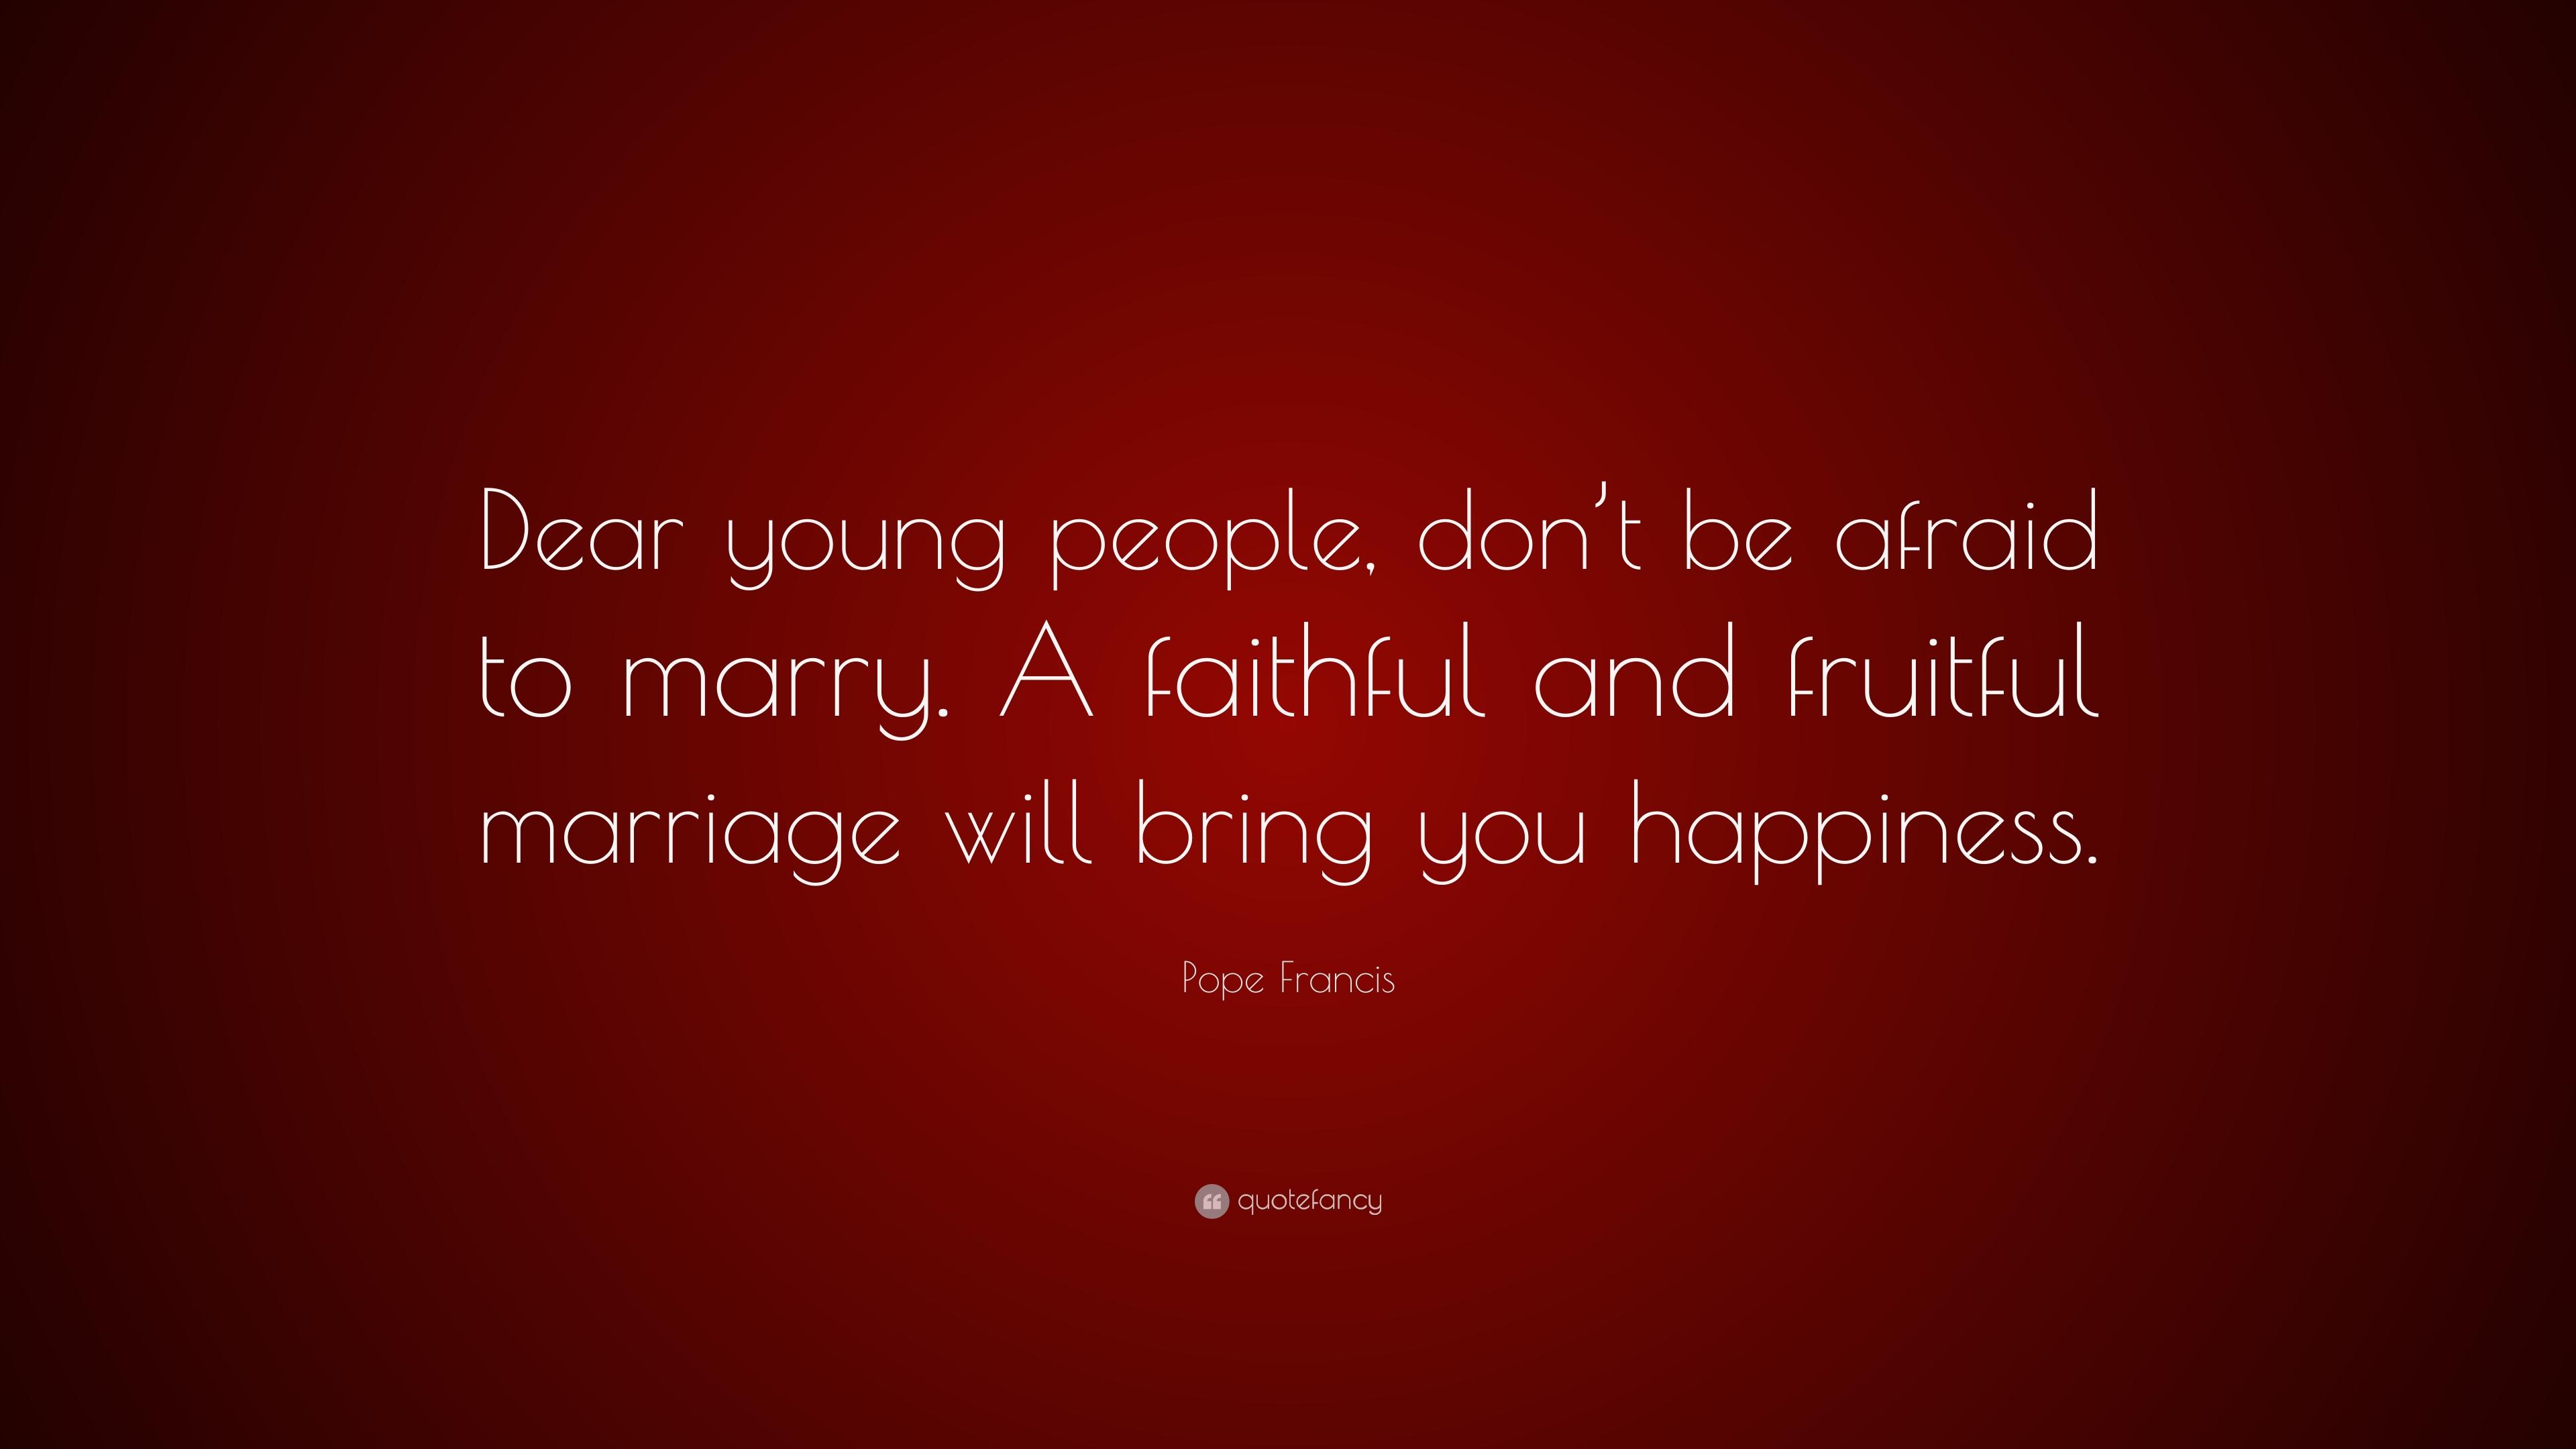 Pope Francis Quote: “Dear young people, don't be afraid to marry. A